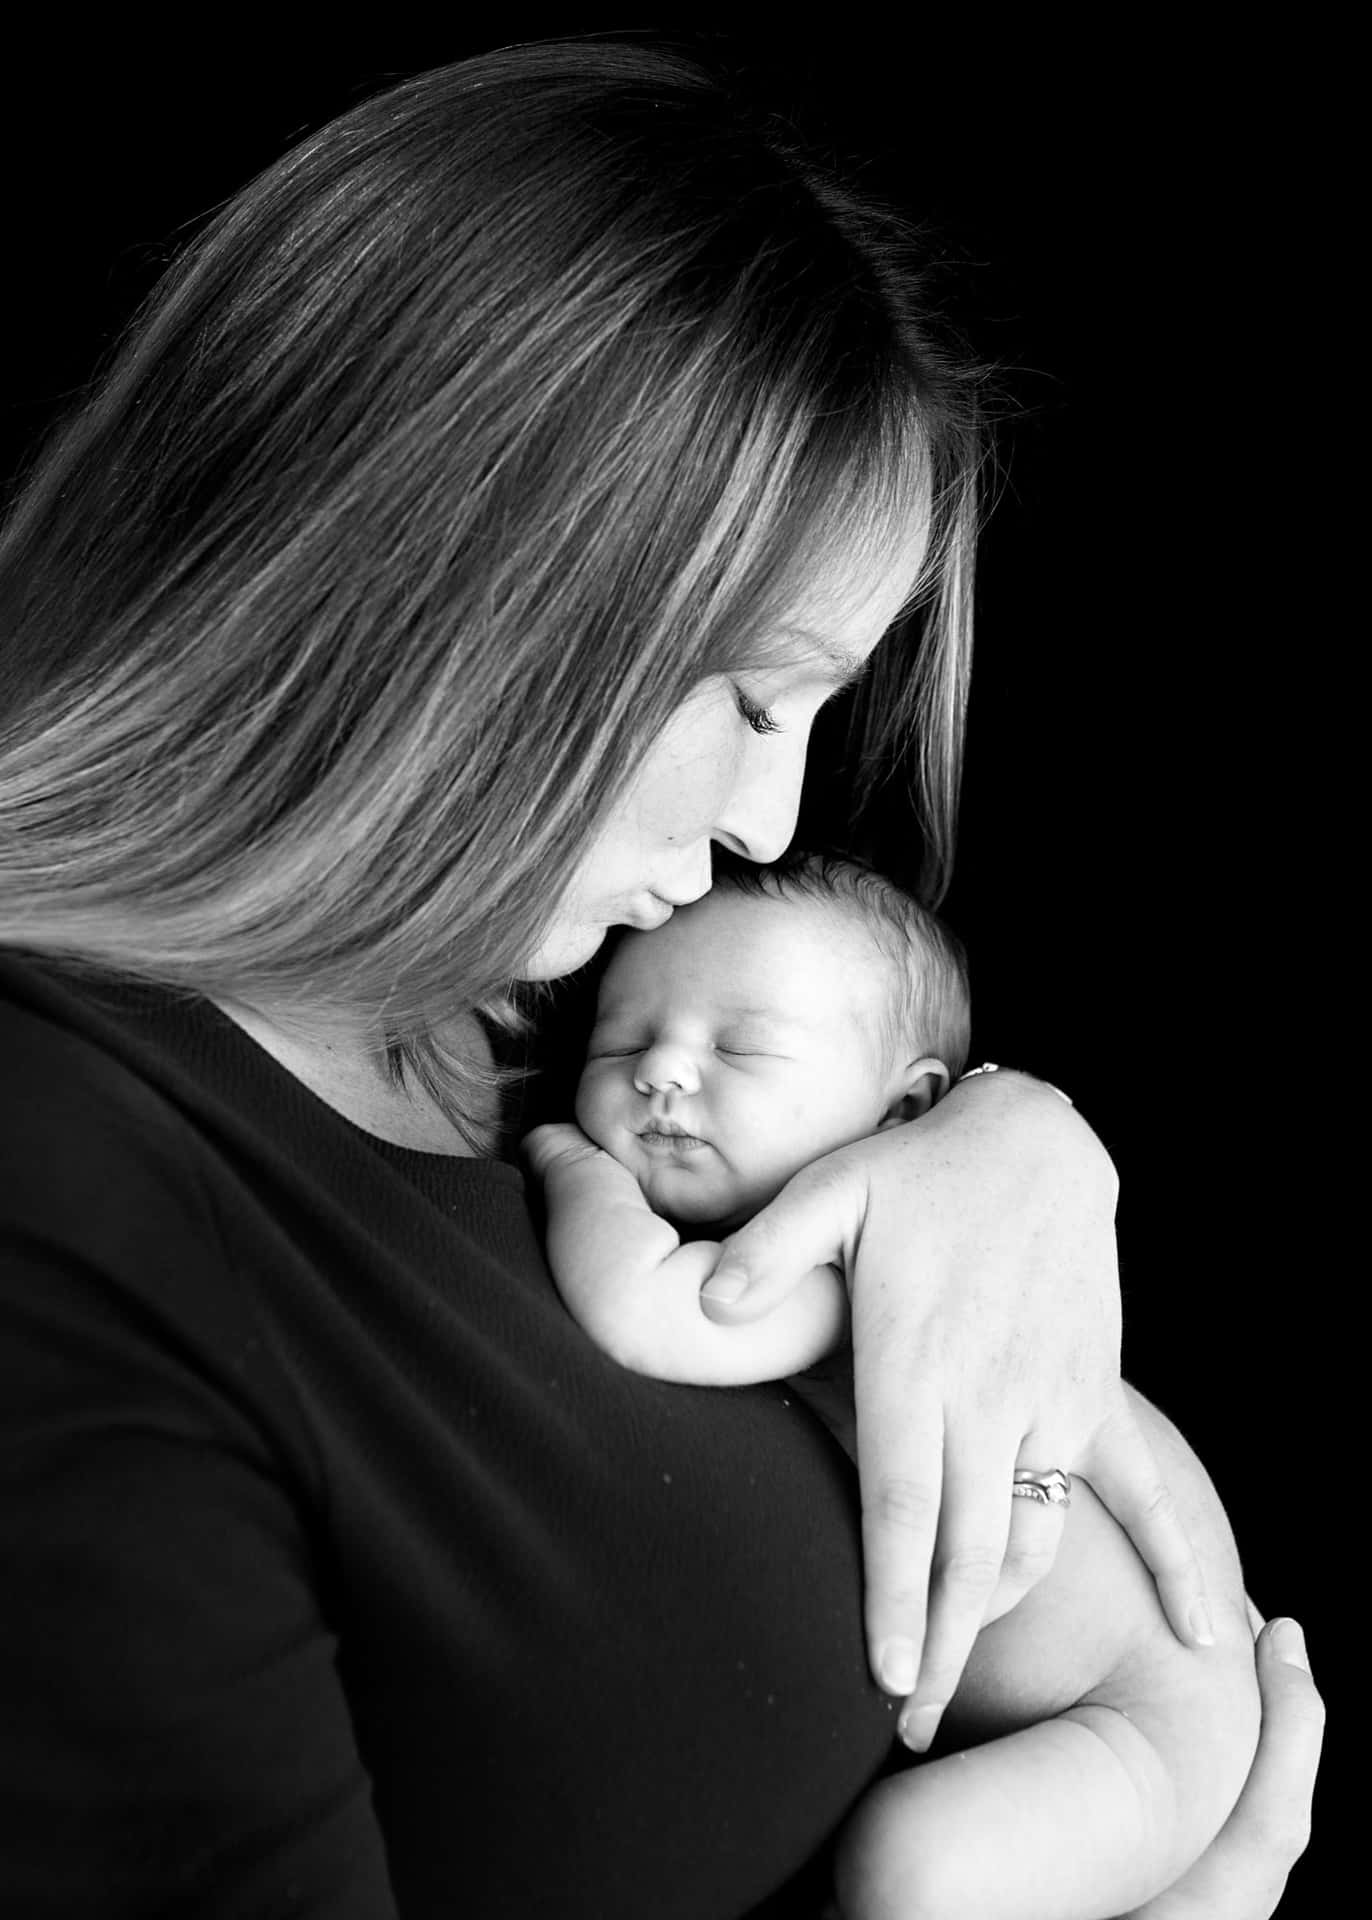 A Woman Is Holding Her Newborn Baby In Black And White